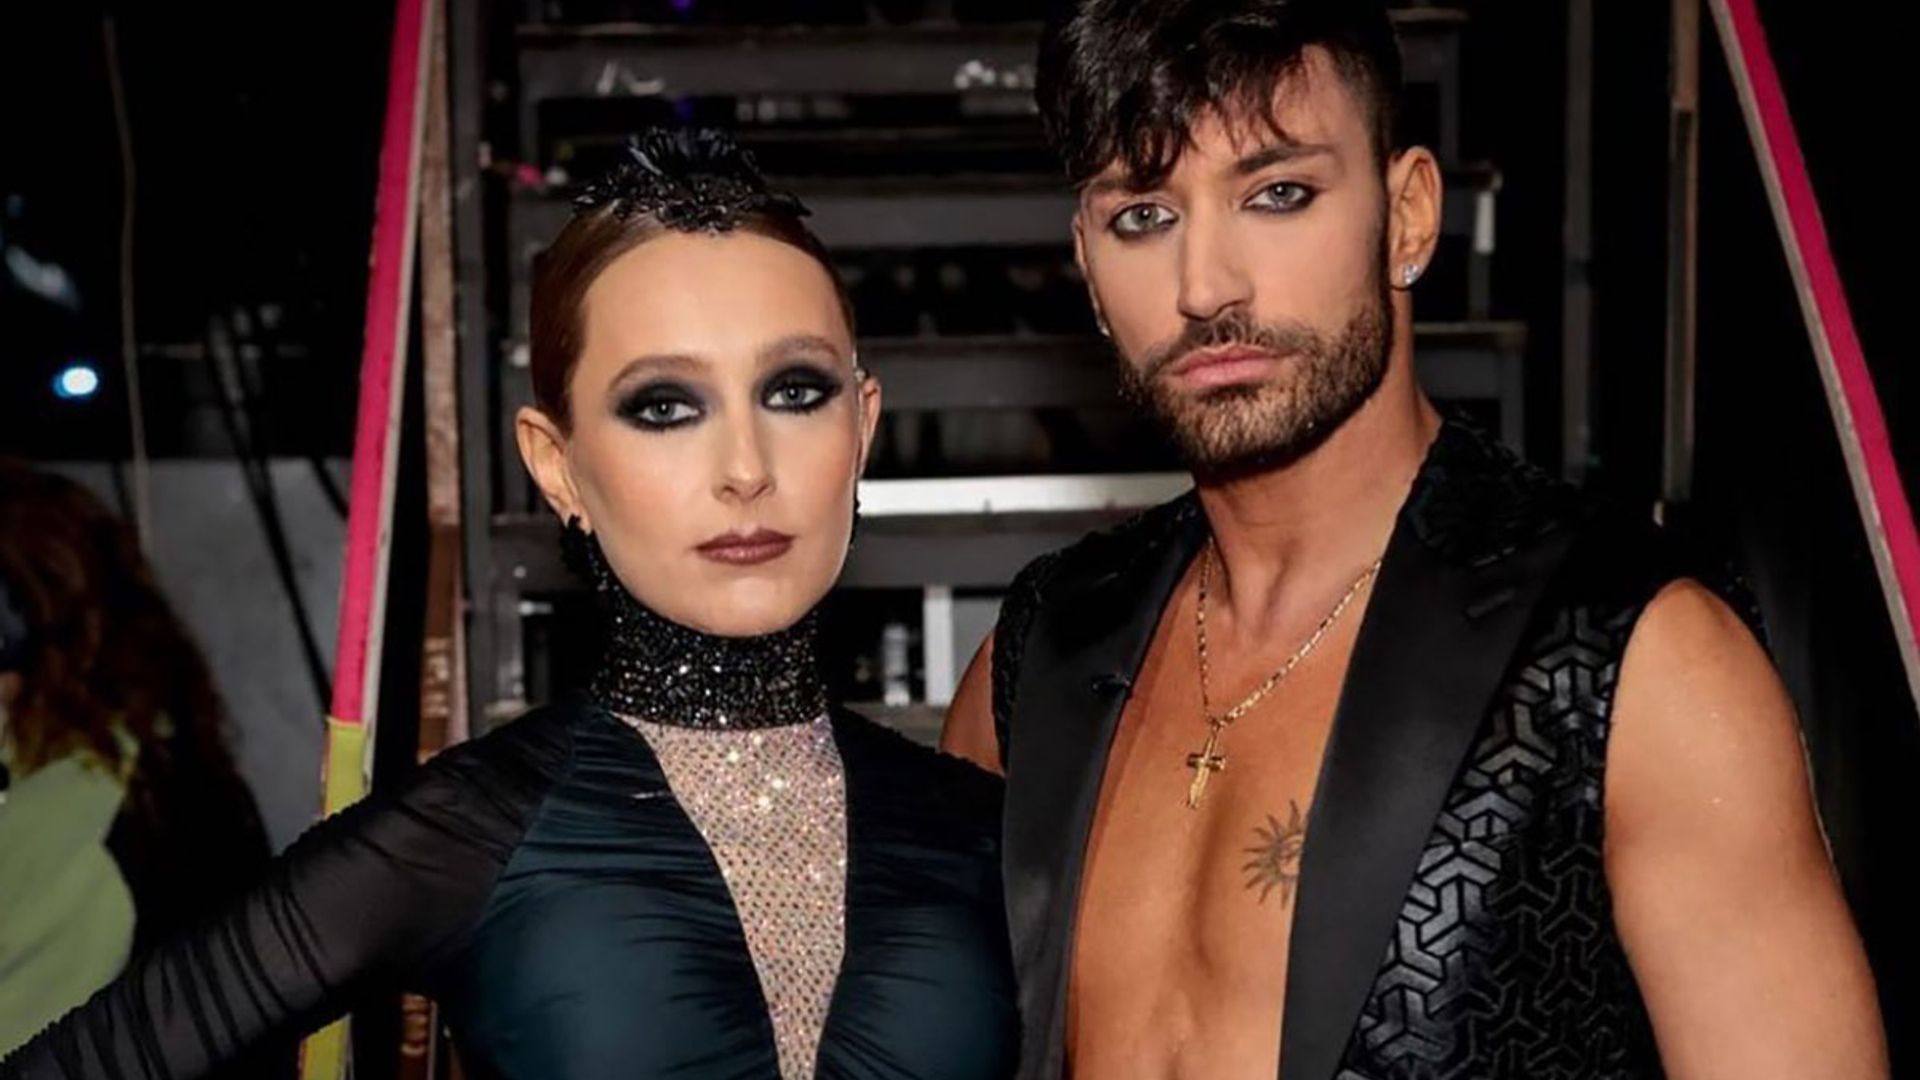 Strictly's Giovanni Pernice shares special message with fans in just his underwear – and they go wild